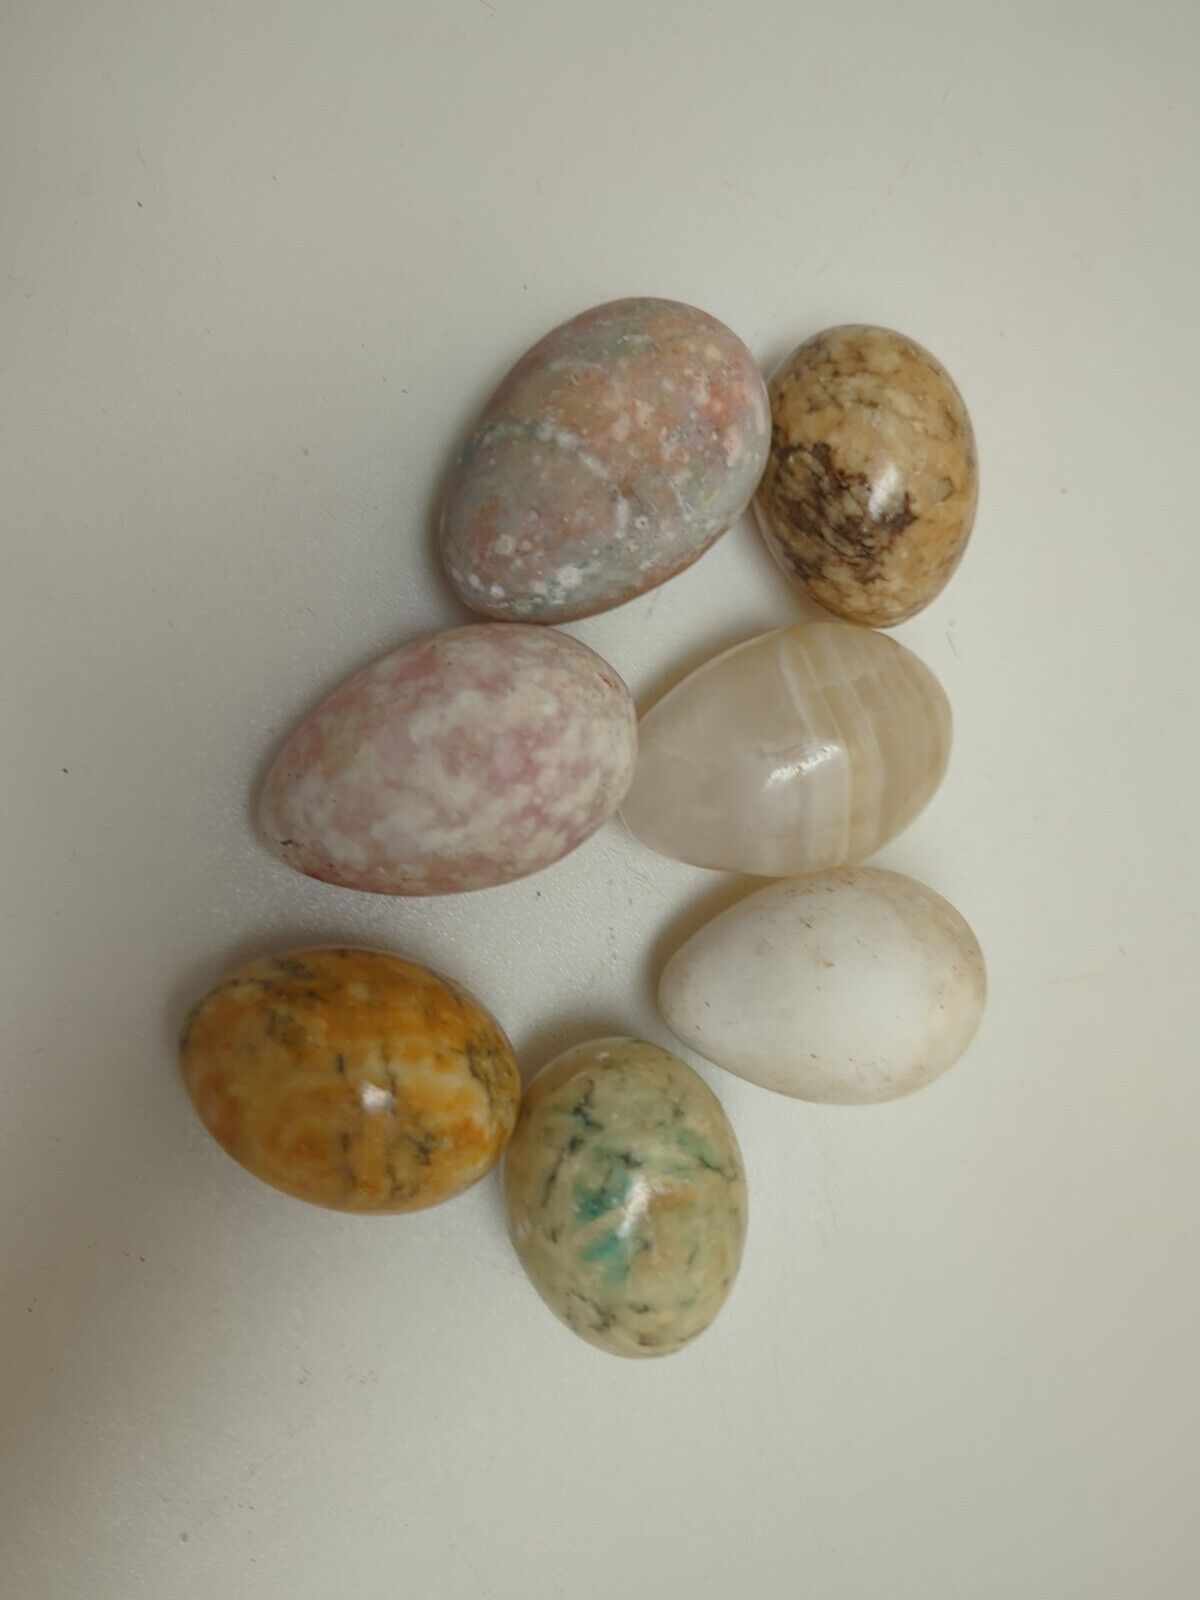 Polished Marble Alabaster Natural Stone Eggs Lot Of 7 